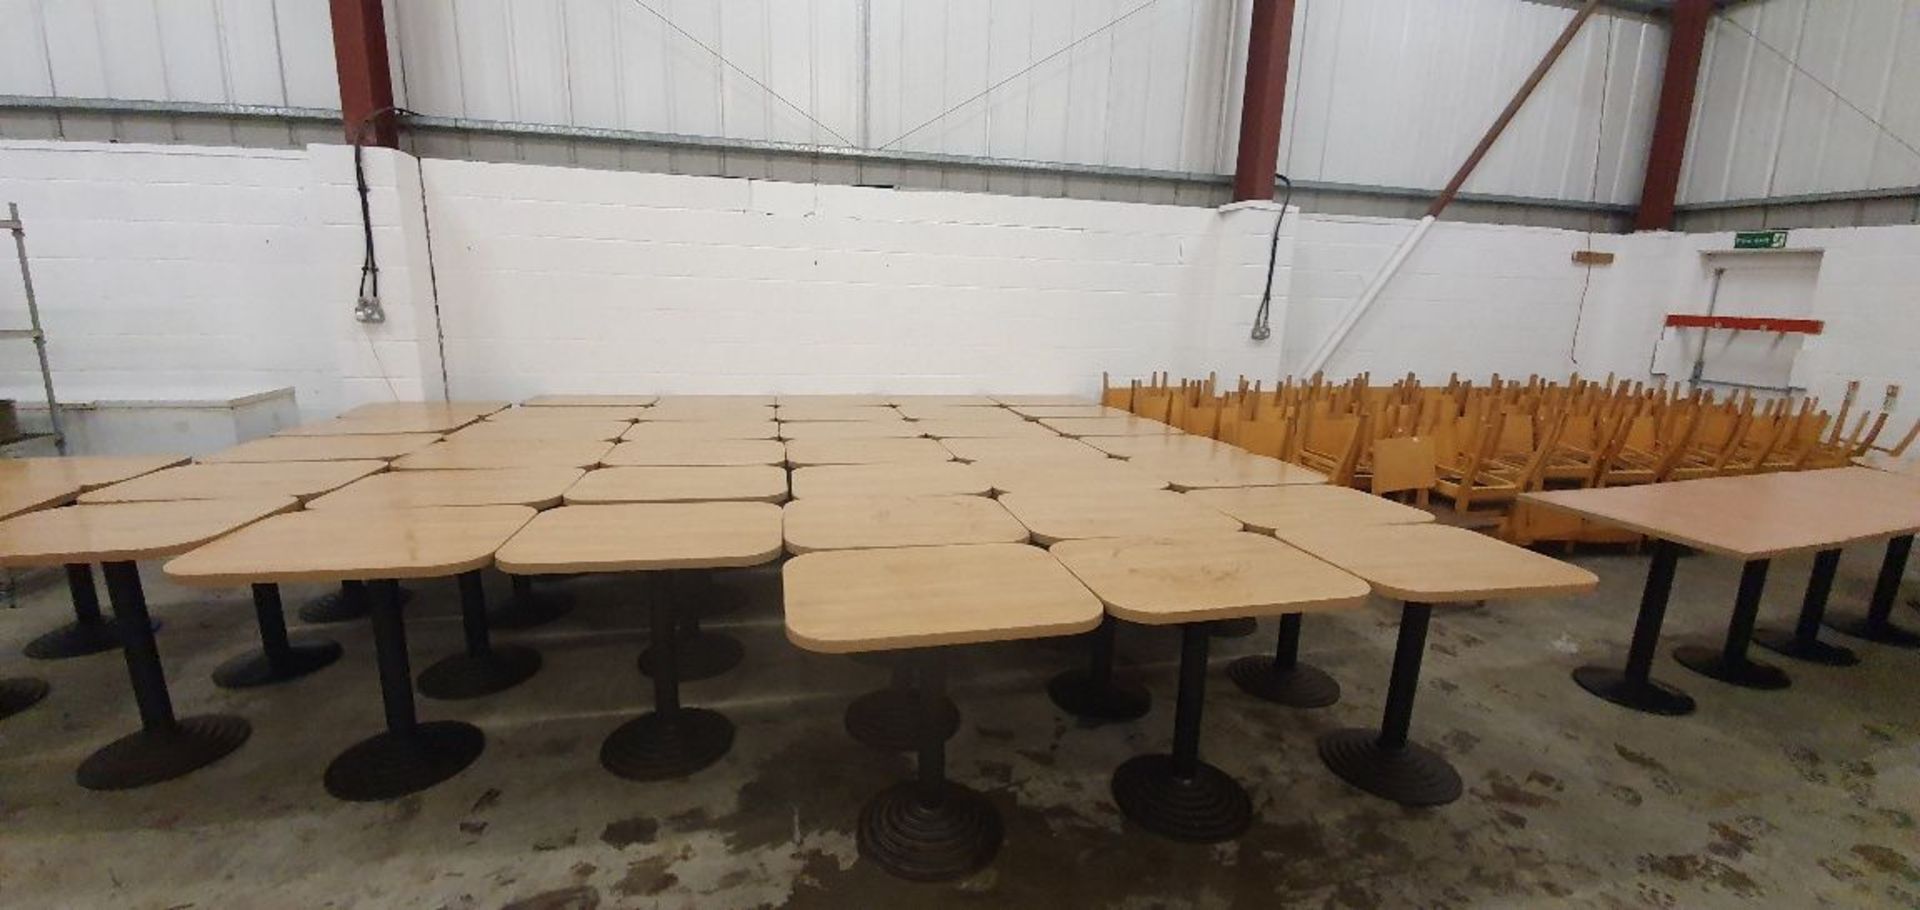 * 6 x rectangular tables with curved edges 800w x 600d x 760h